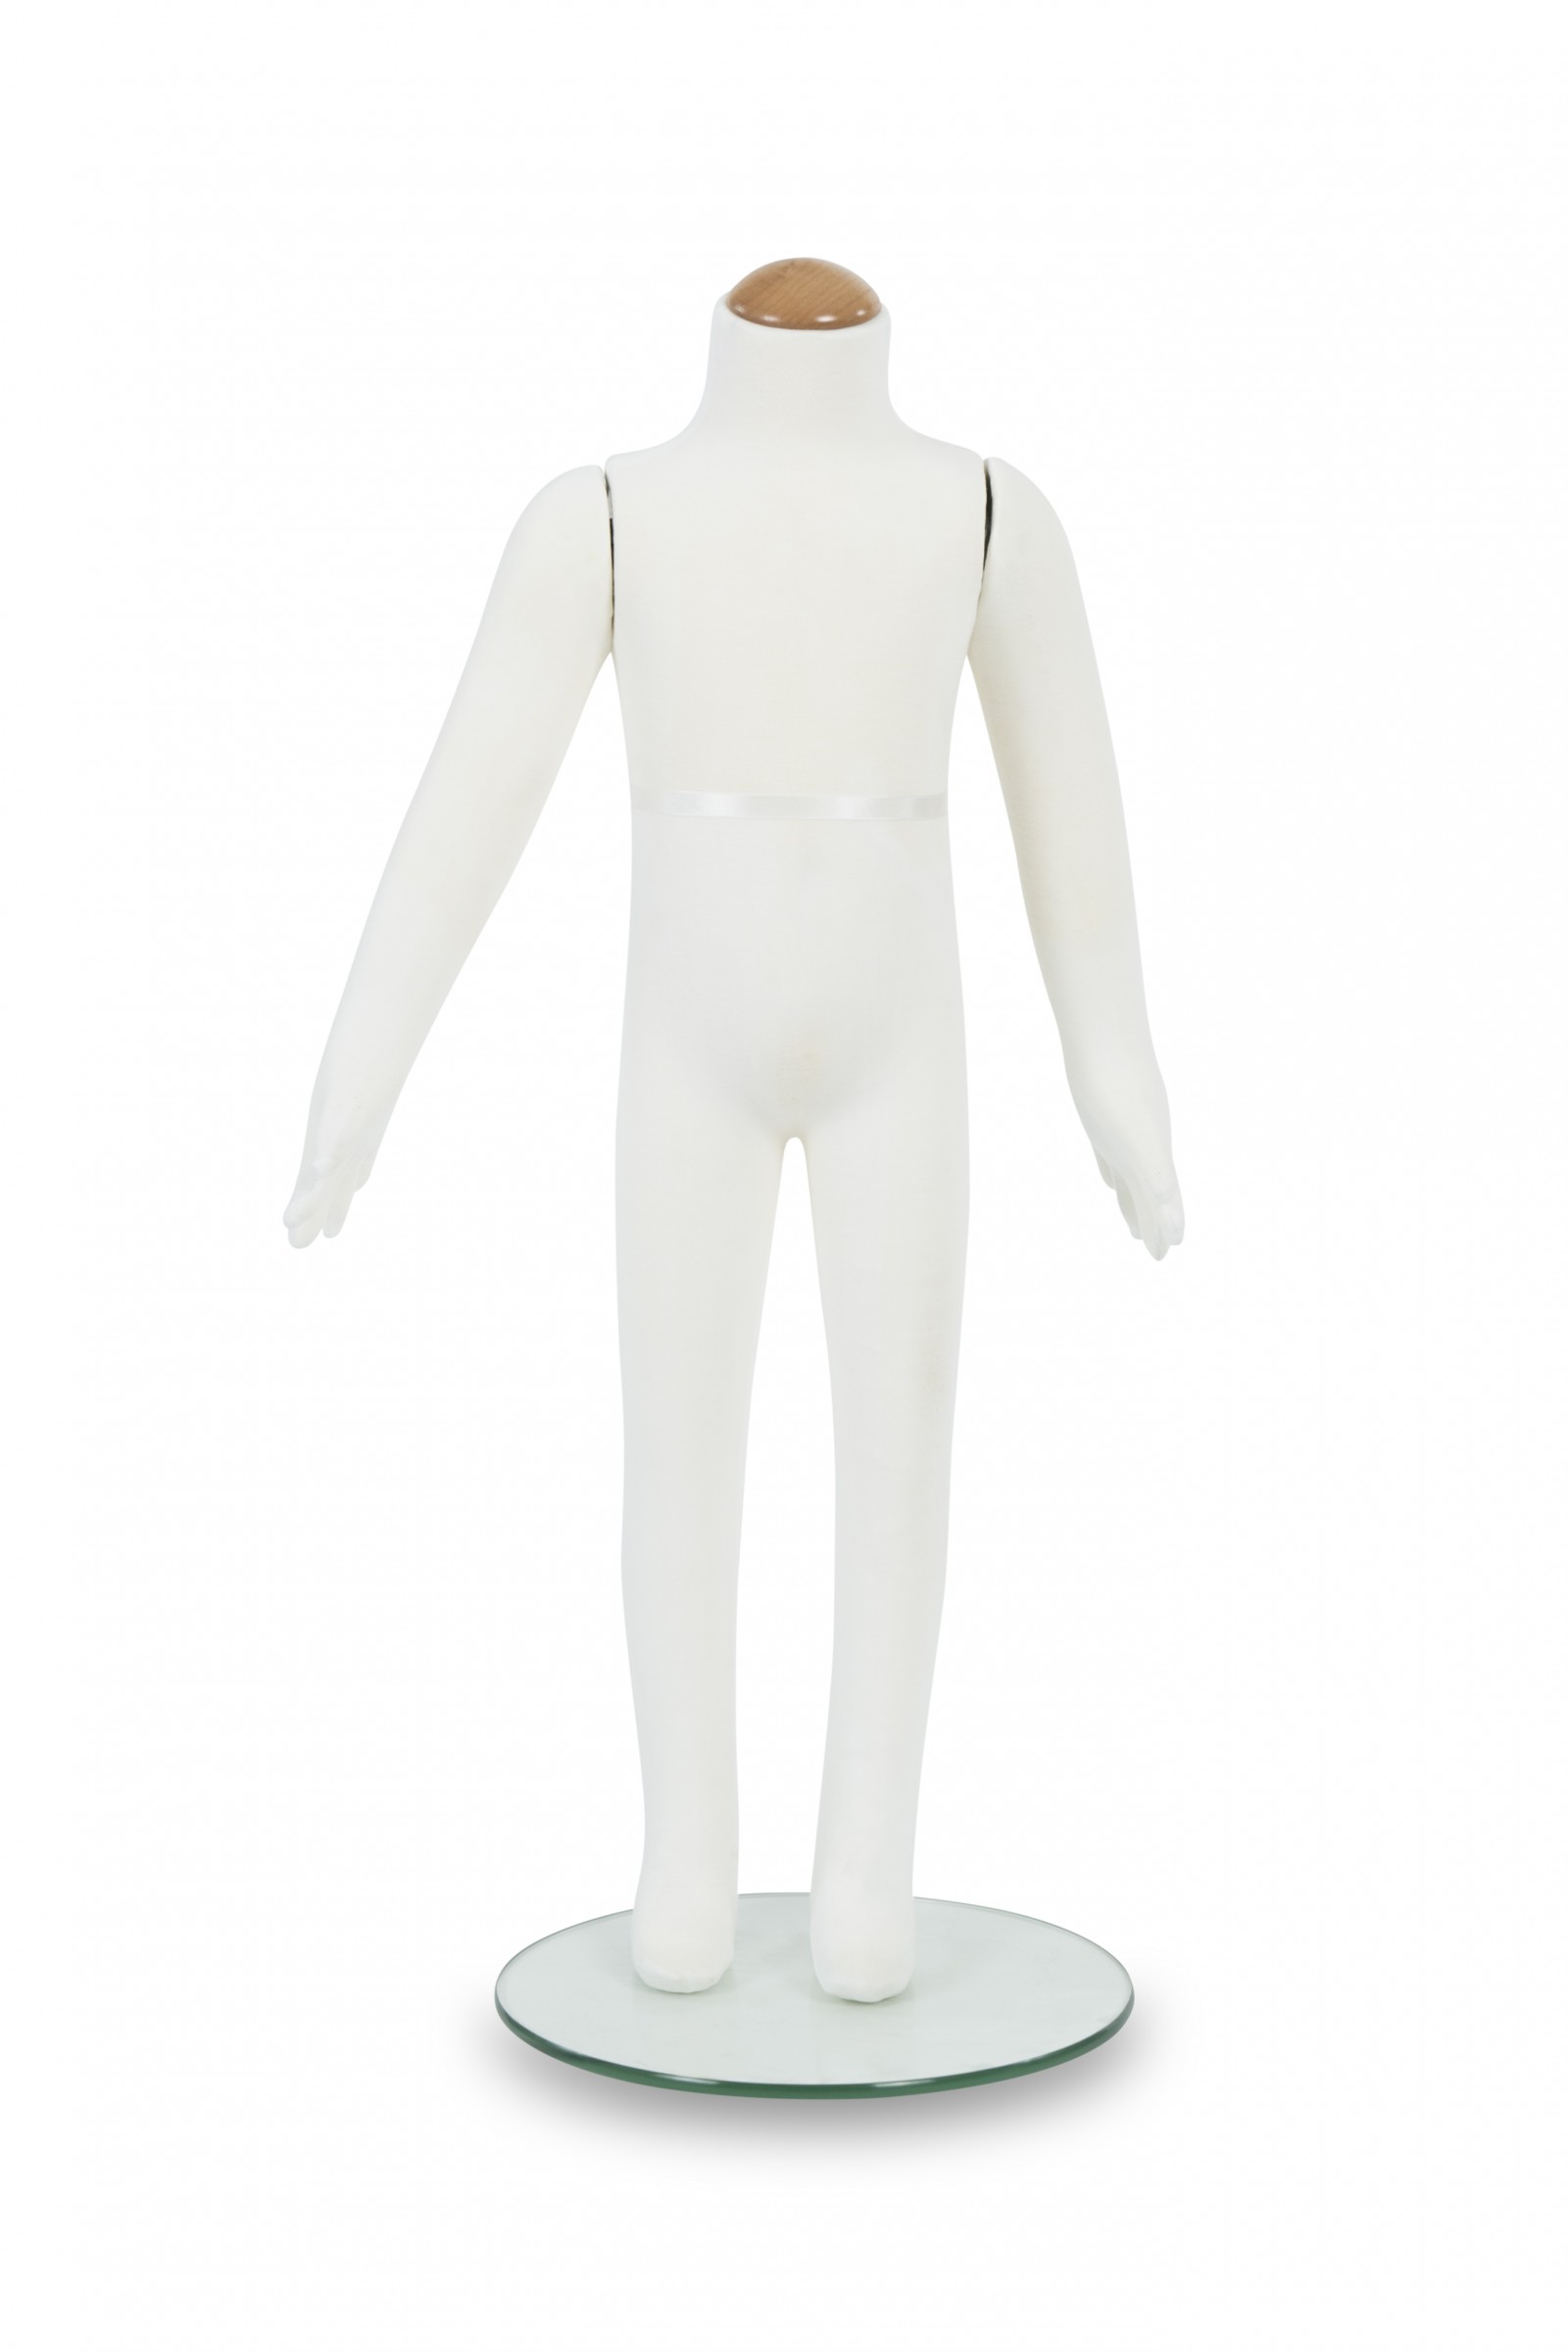 Childs Headless Body Form Mannequin Age 2, 4 & 6